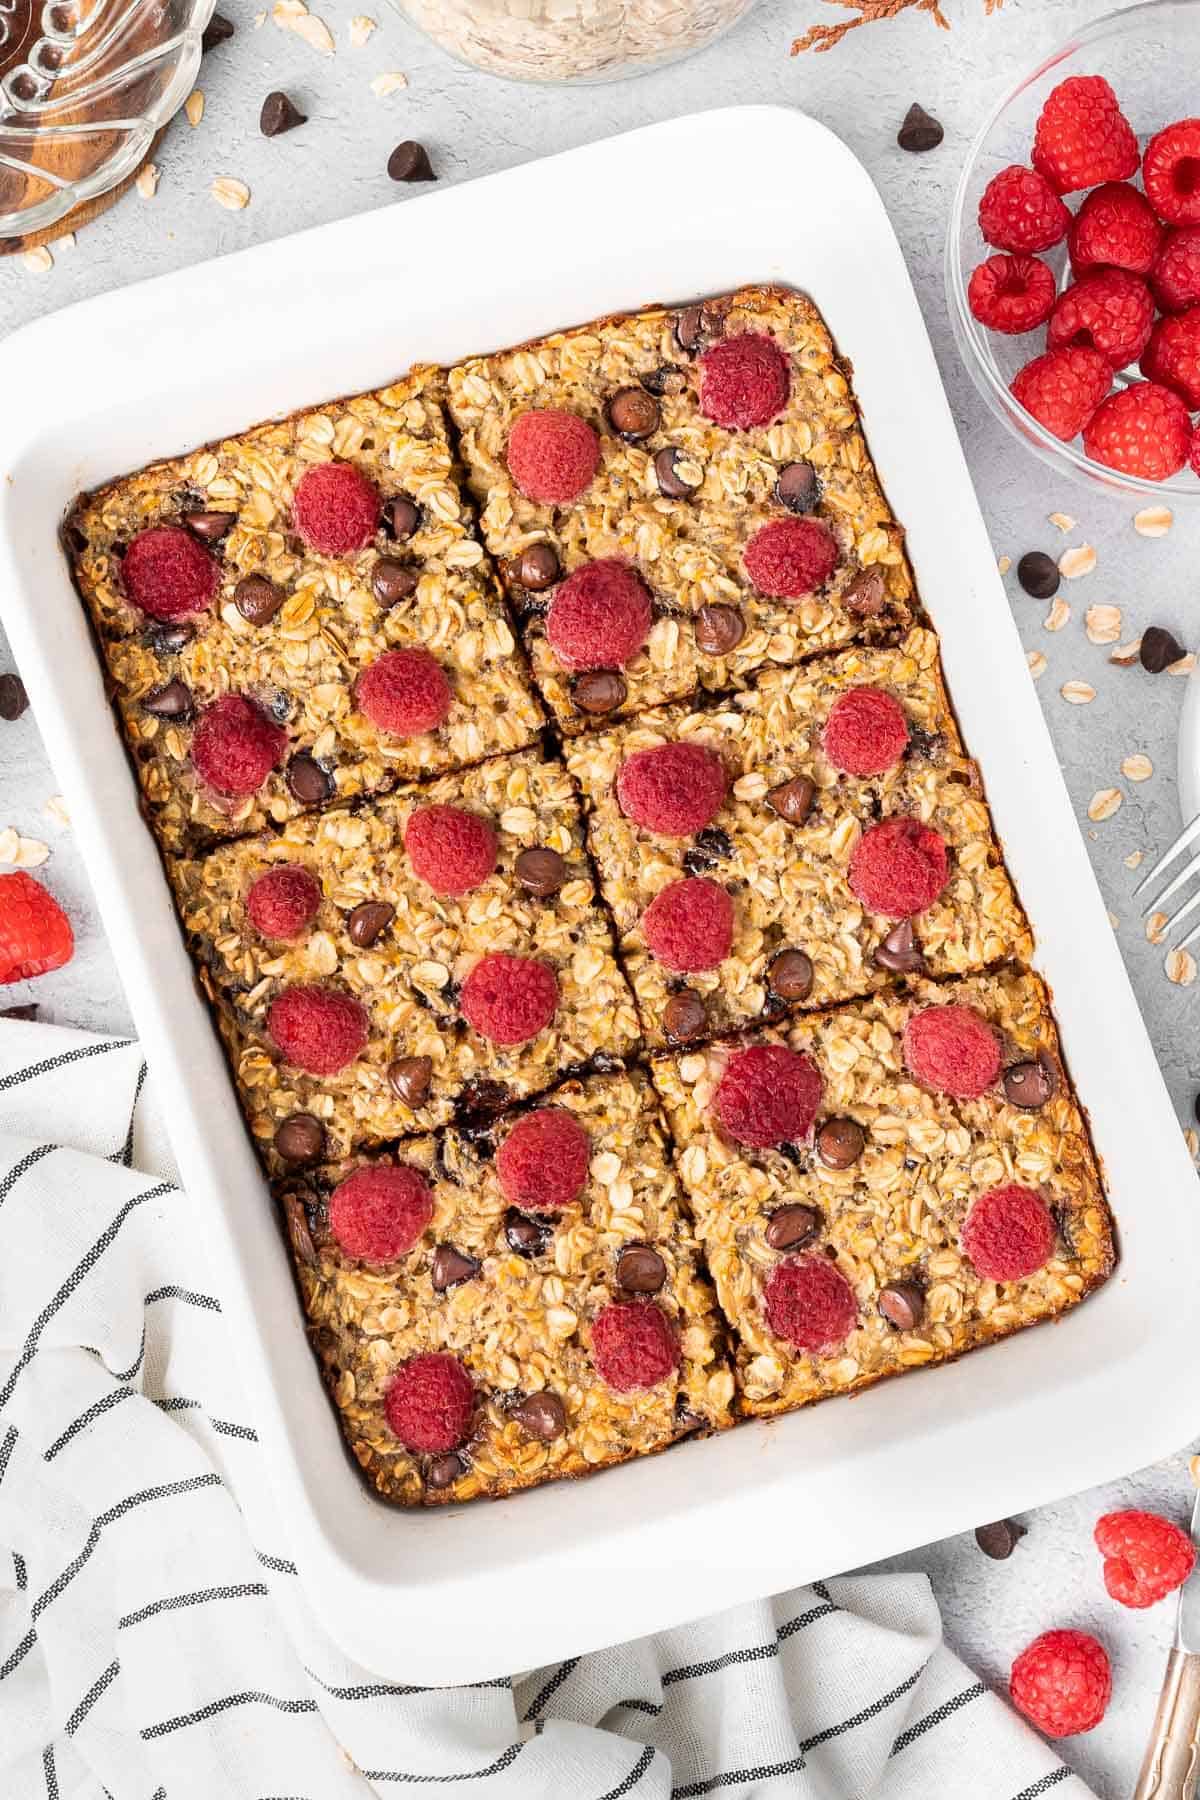 White rectangular dish of baked raspberry oatmeal, cut into six pieces.